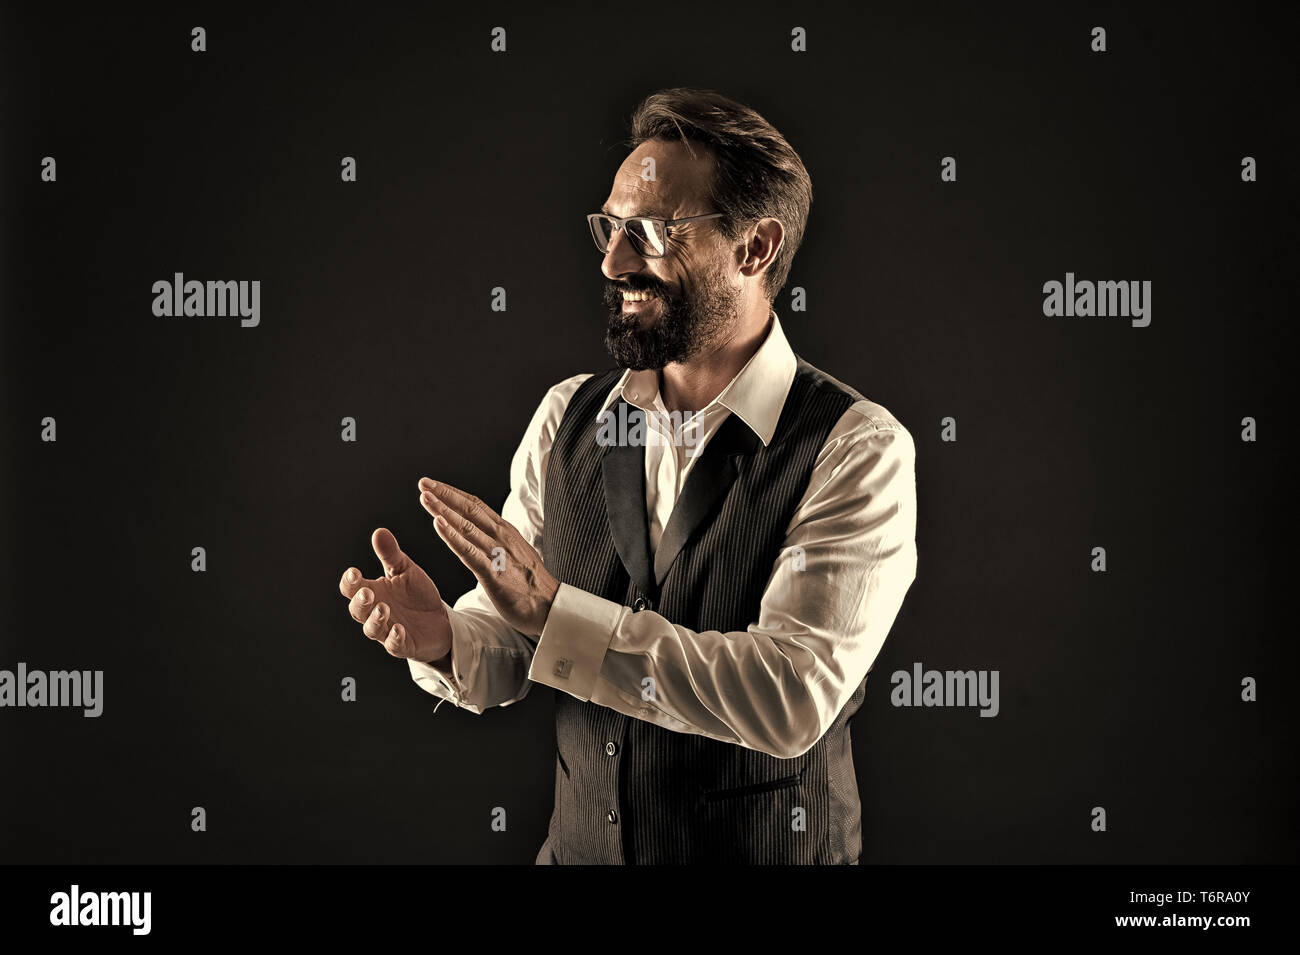 Bravo applause. Man well groomed elegant formal suit clap hands approving something black background. Businessman excited about business project applause. Loud applause to genius business speaker. Stock Photo